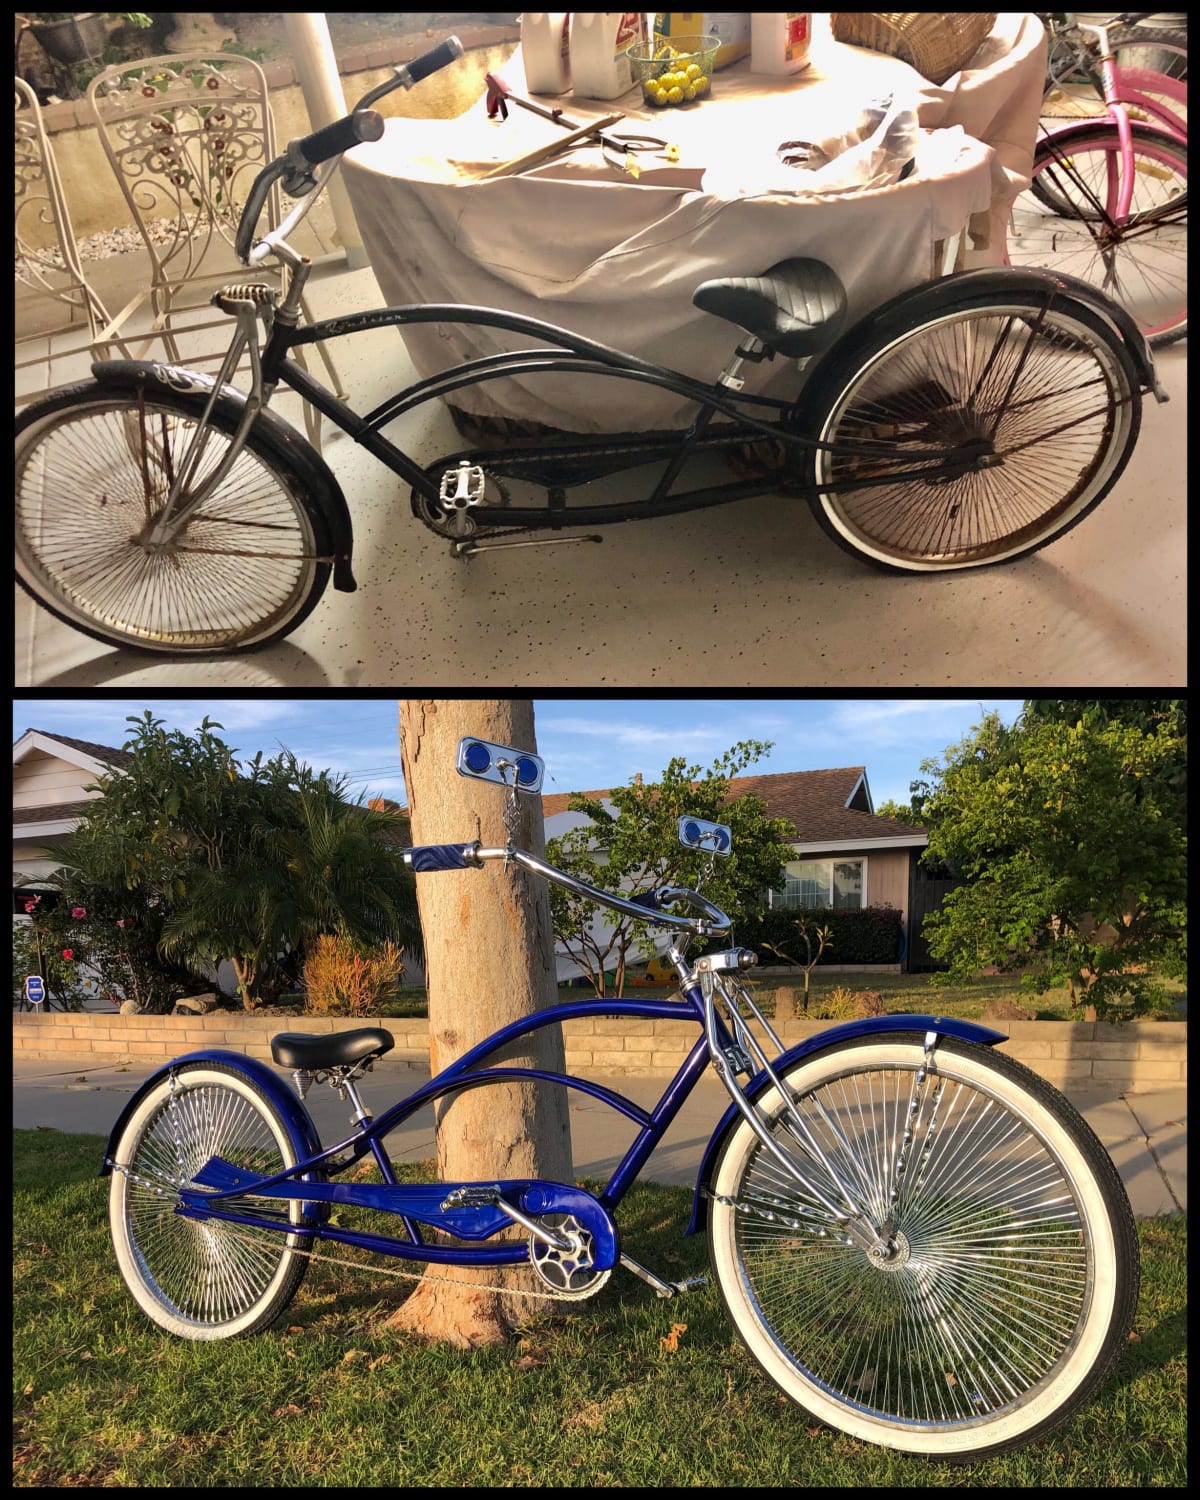 I found an abandoned Kustom Kruiser Roadster after the neighbors moved away and decided to make it my own as quarantine restoration project. This was my first time restoring a bike.